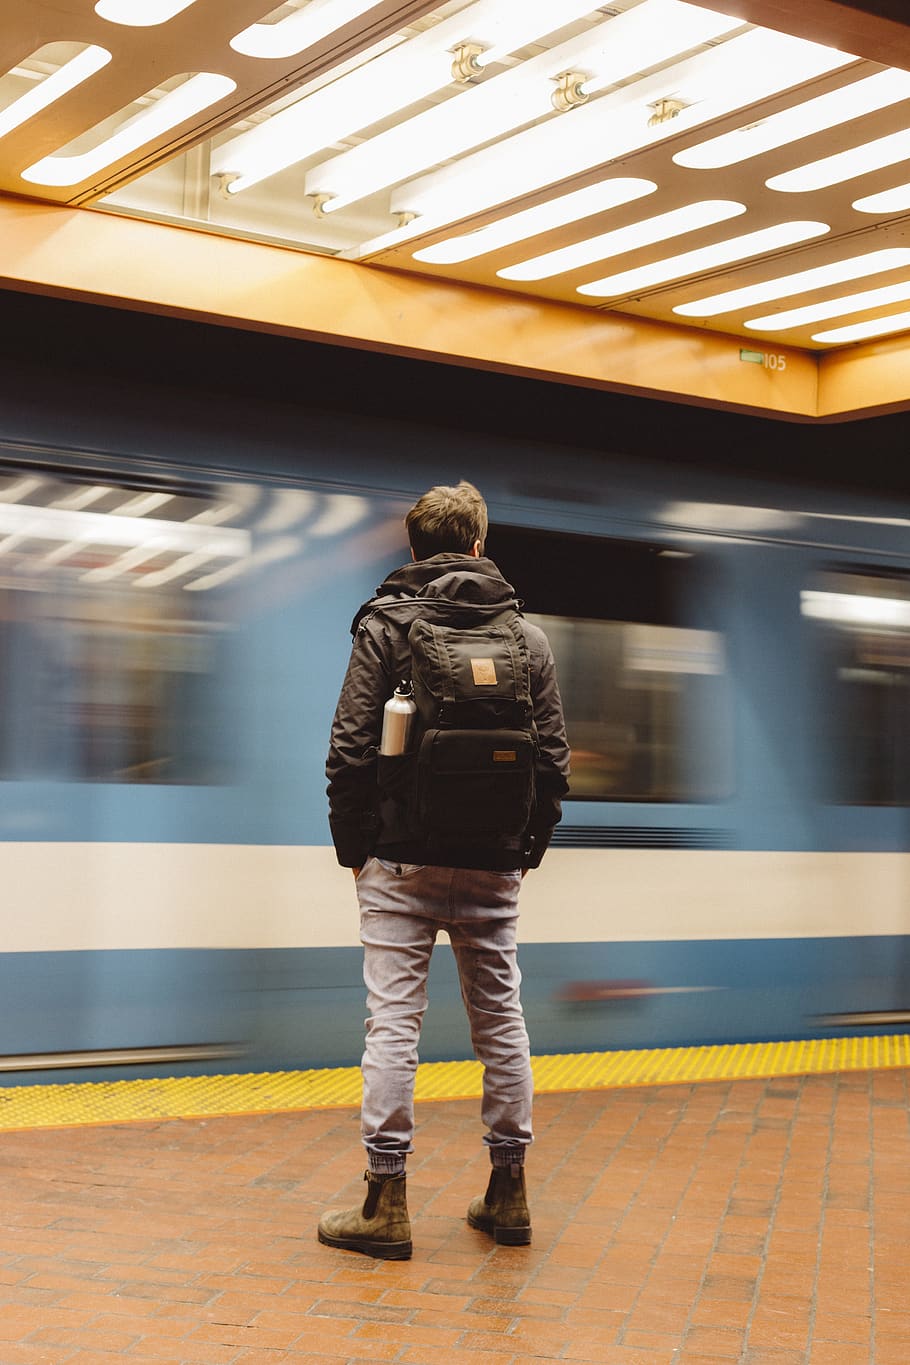 commuter, waiting, subway, man, male, person, standing, blur, motion, speed